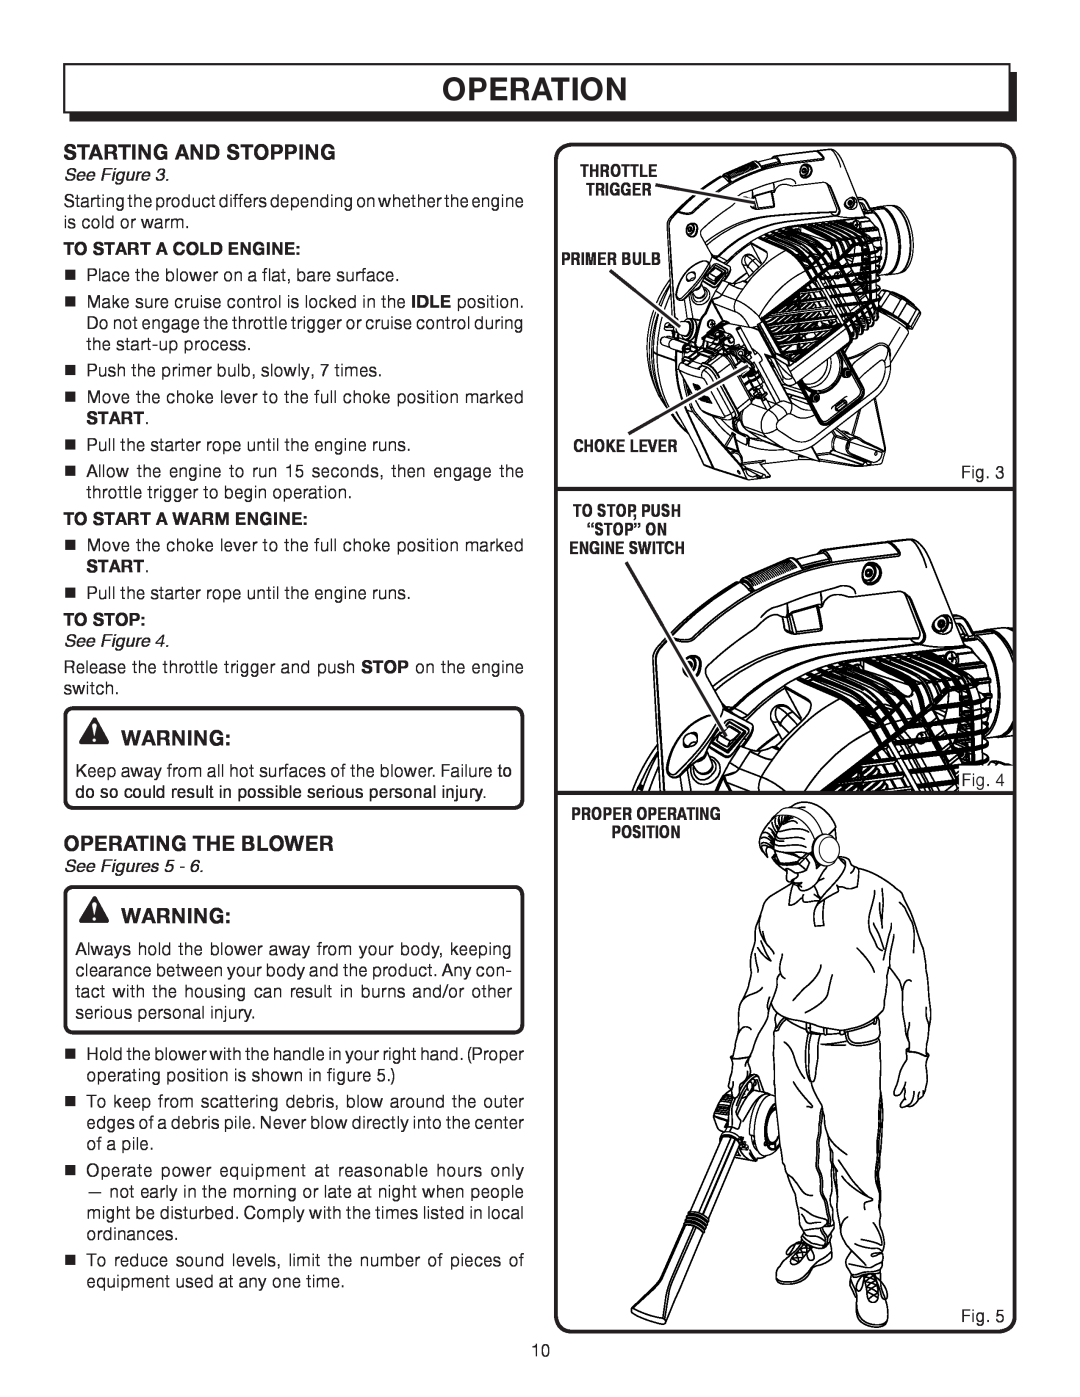 Homelite UT08512A manual Operation, To Start A Cold Engine, To Start A Warm Engine, To Stop, See Figures 